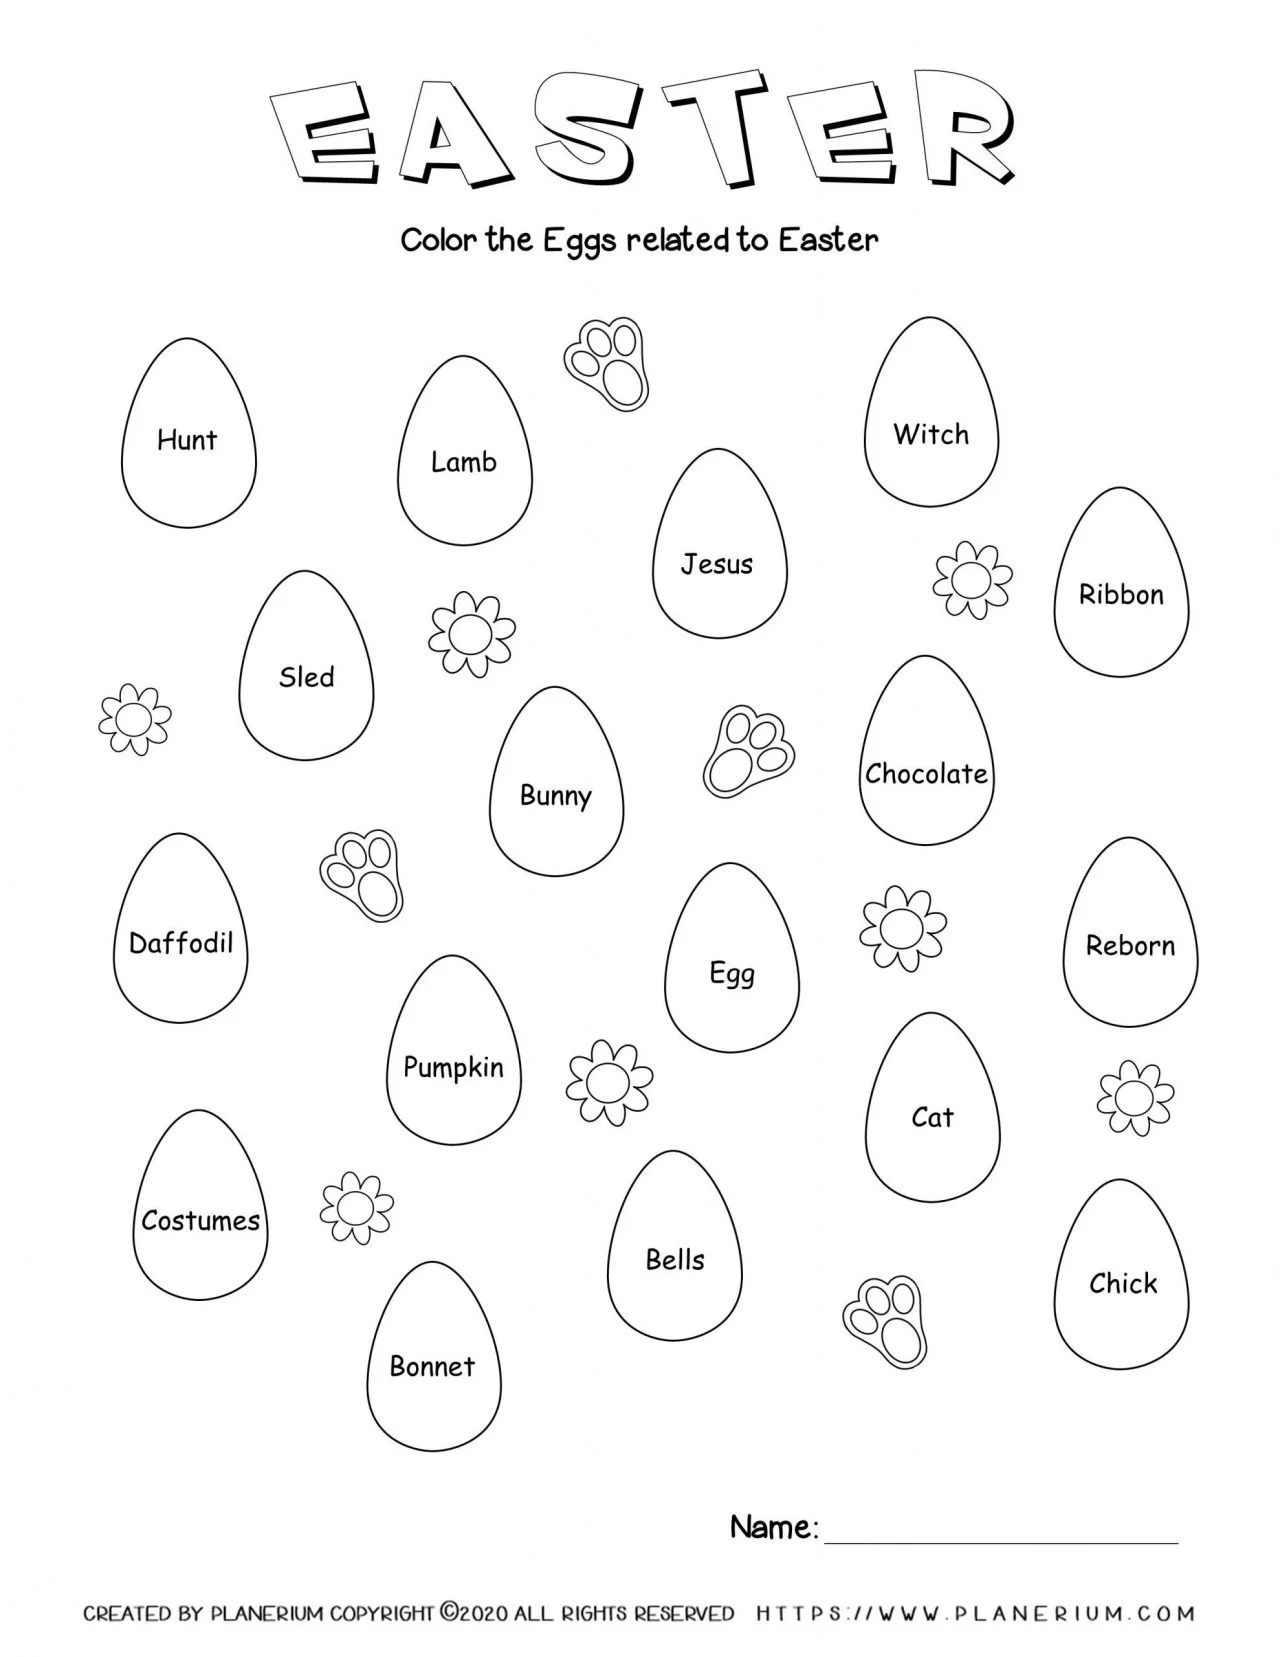 Easter related words in Easter eggs